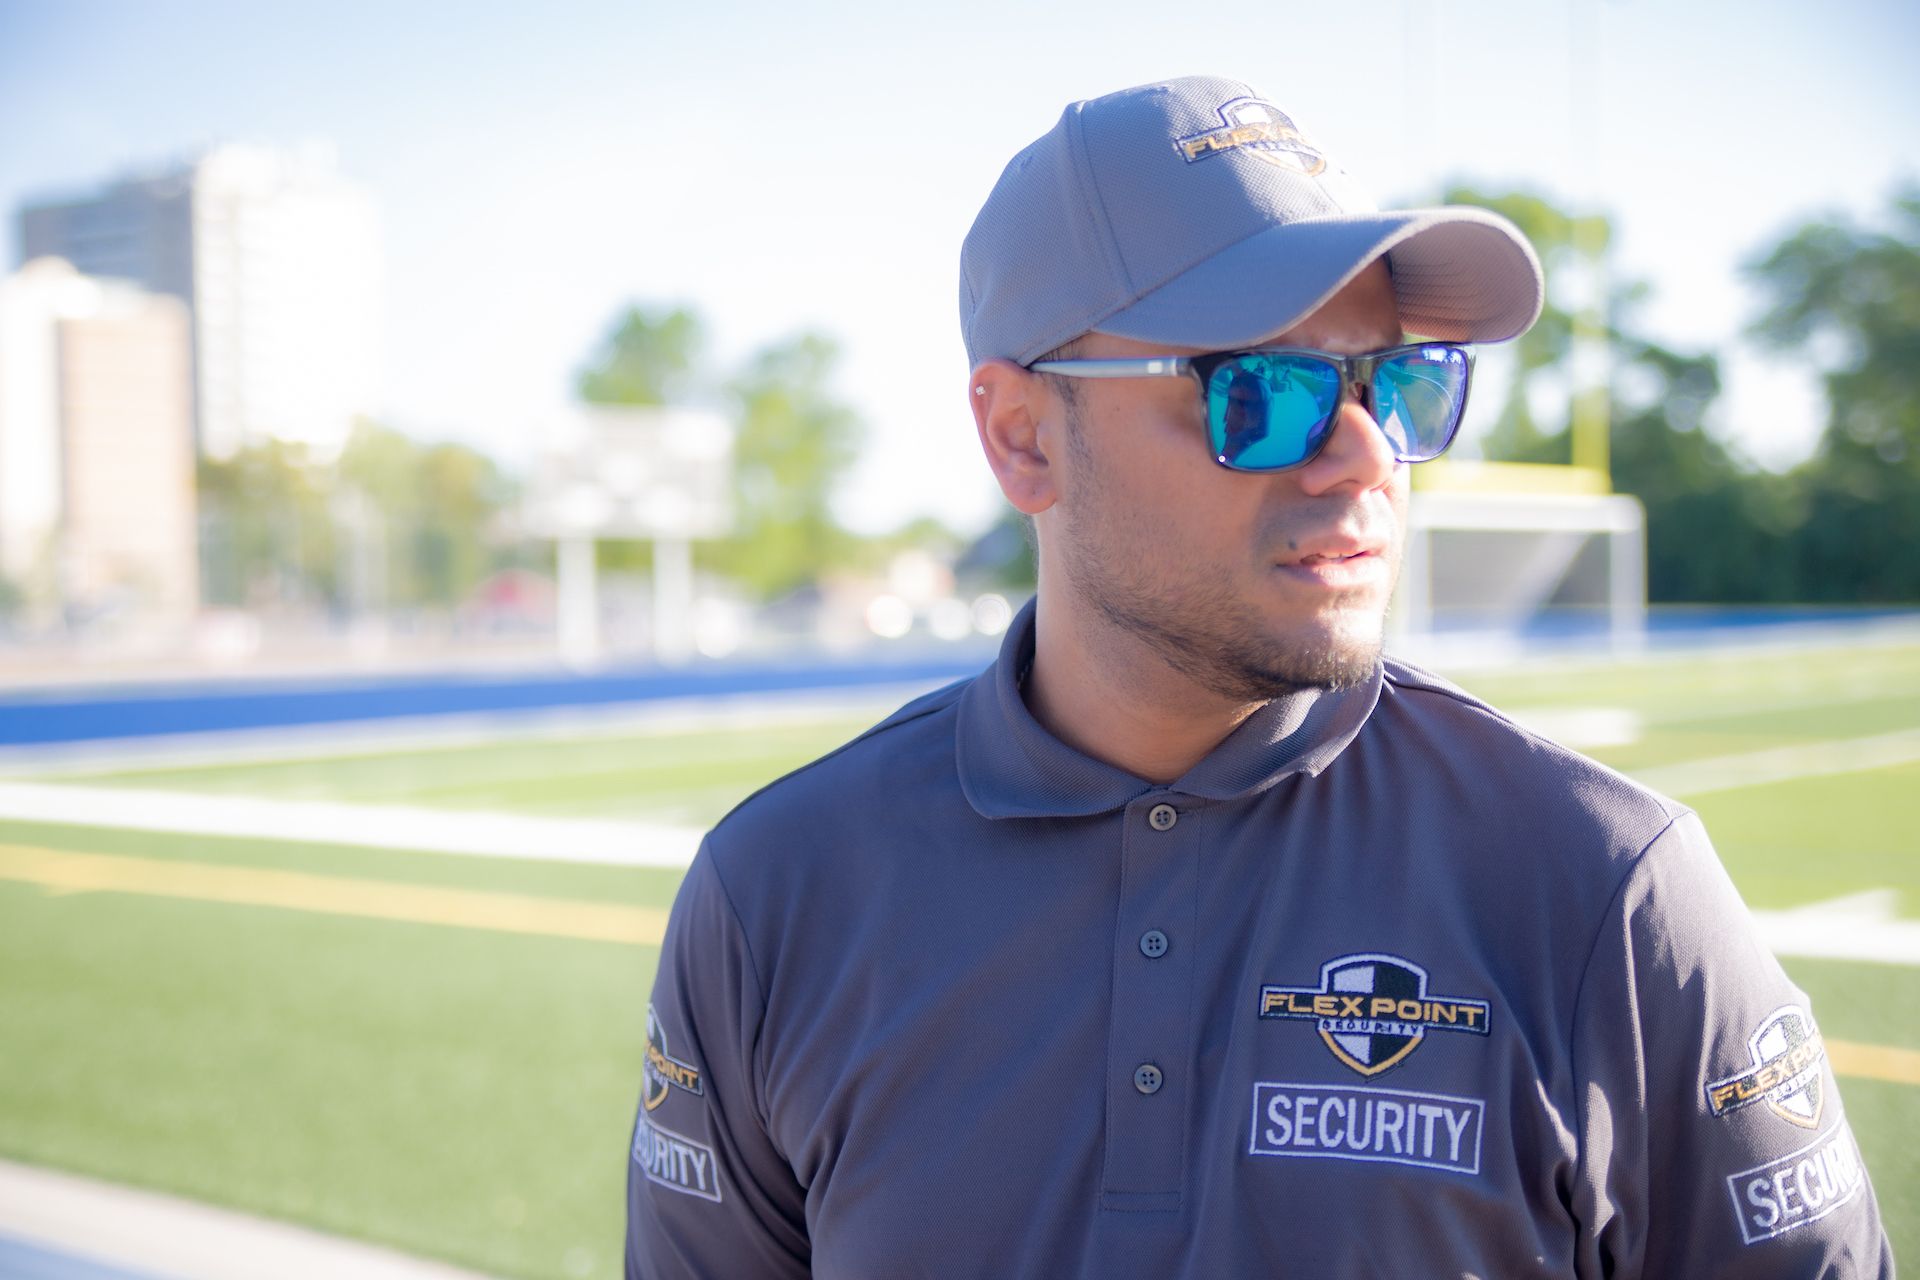 A male Flex Point Security guard standing next to a soccer field while providing security services at an event